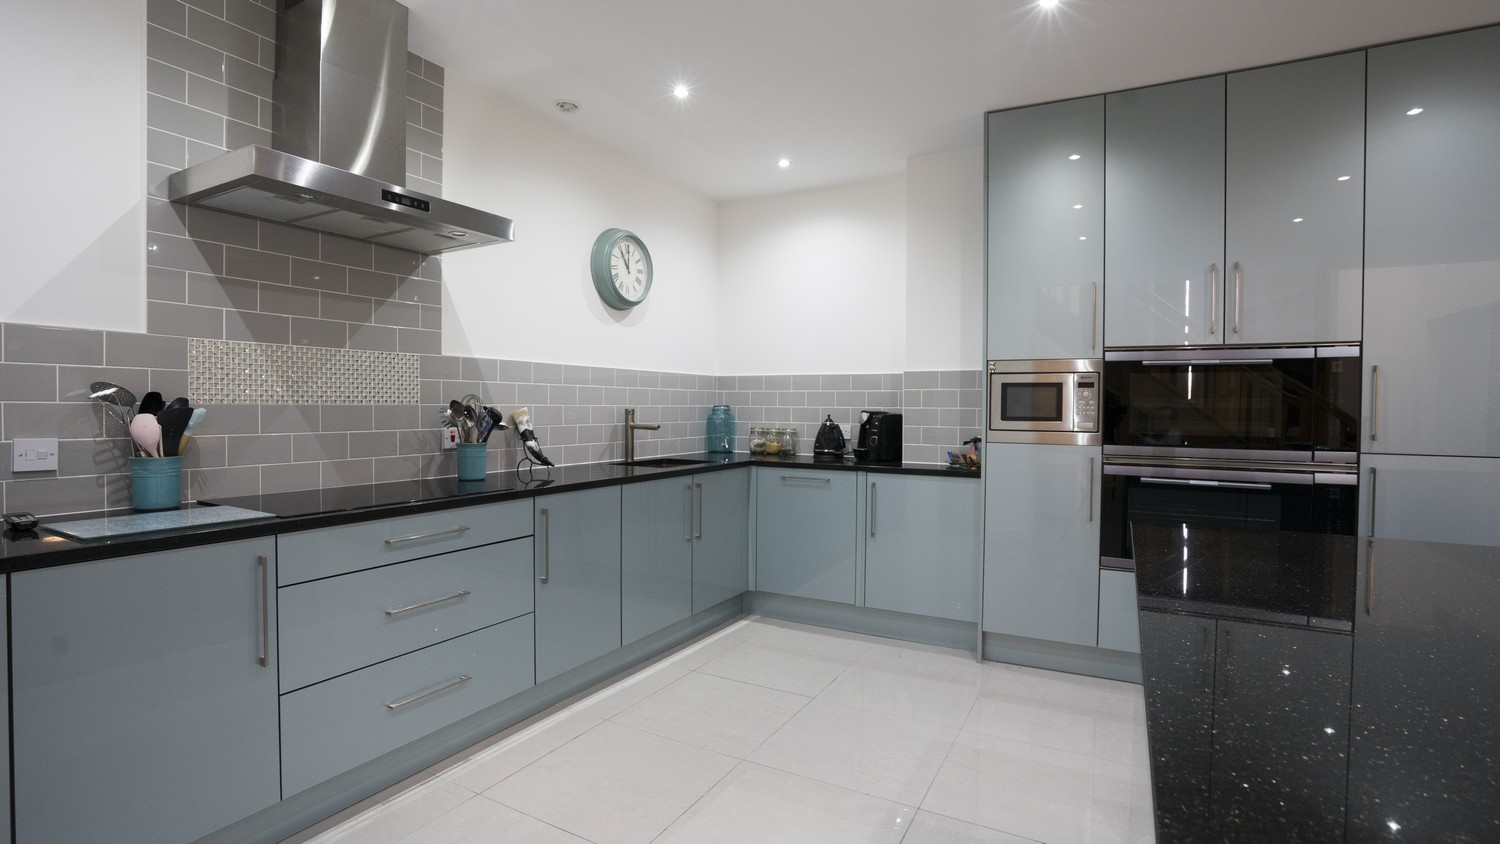 A run of lower cupboard create he perfect space for a sink and cooking hob, an ideal space for preparing meals.